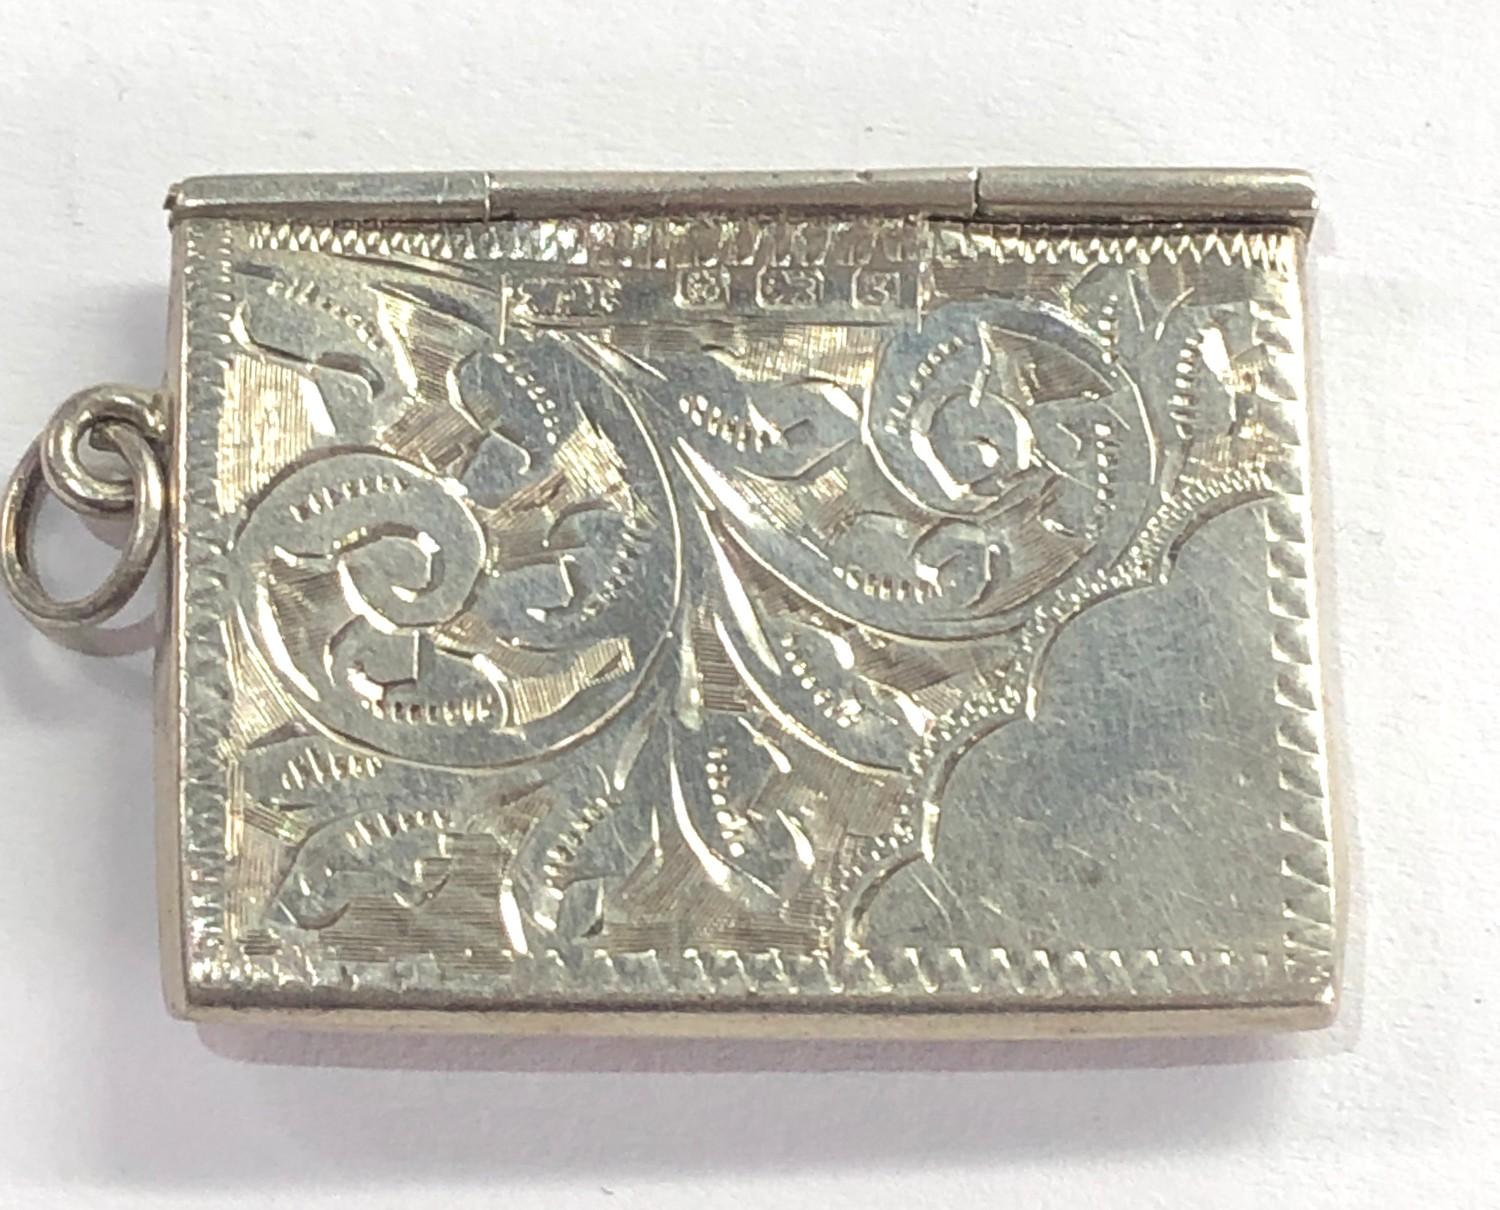 Small antique silver envelope stamp case Birmingham silver hallmarks please see images fordetails - Image 2 of 2